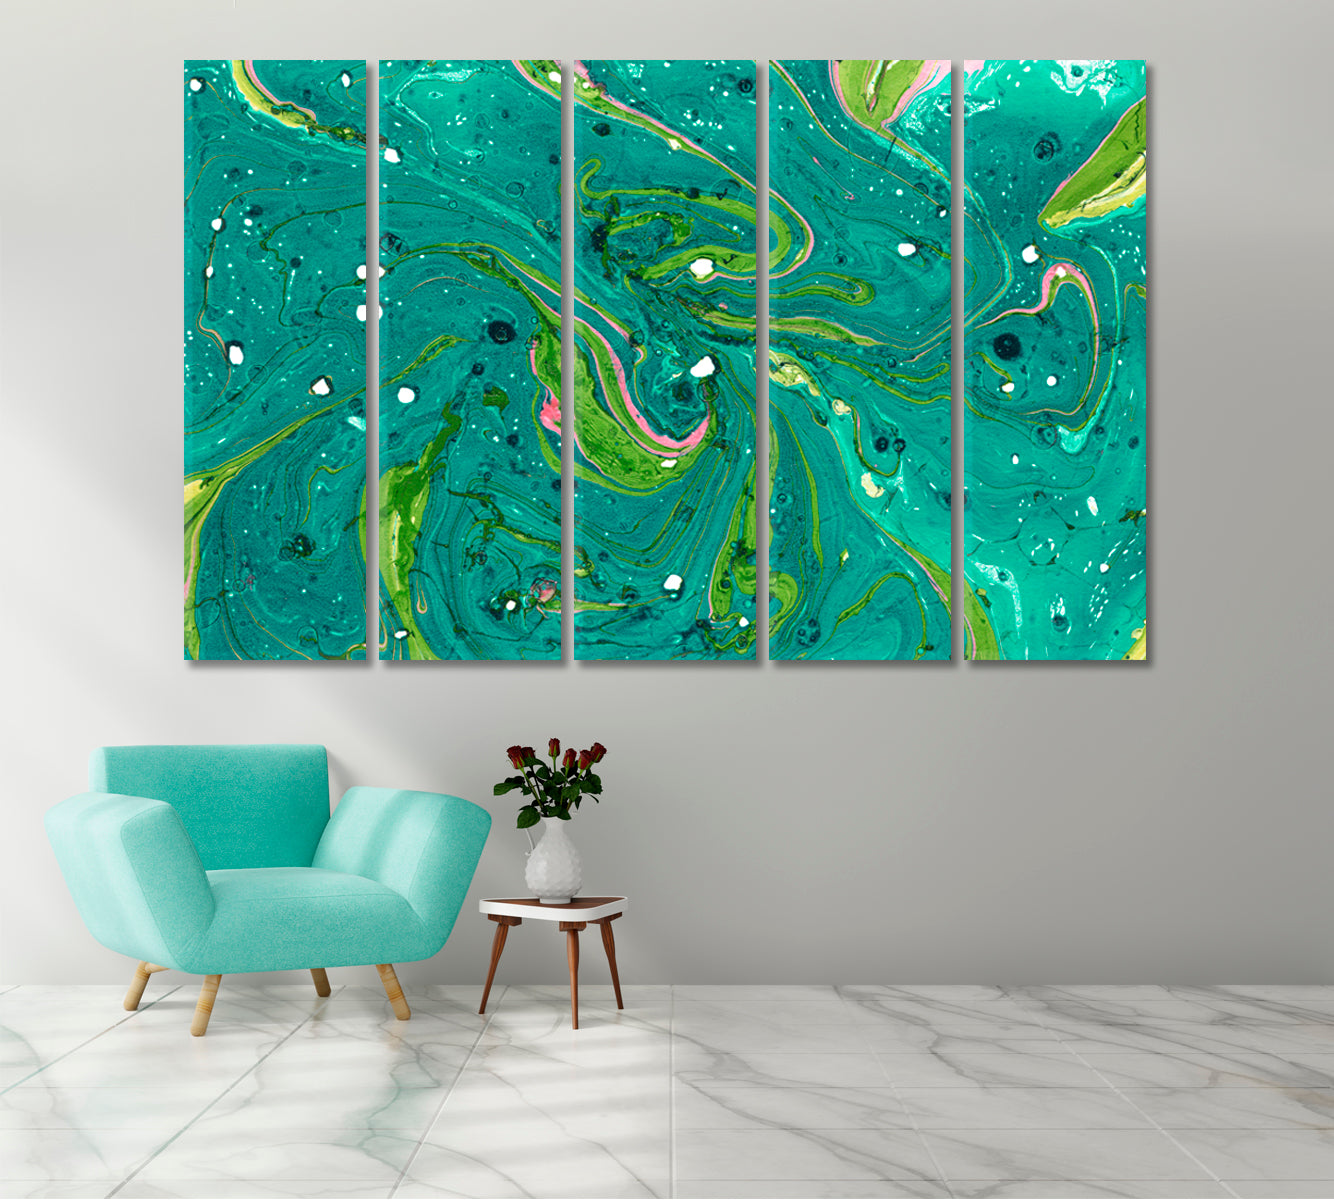 Abstract Turquoise-Green Marble Pattern Canvas Print-Canvas Print-CetArt-1 Panel-24x16 inches-CetArt